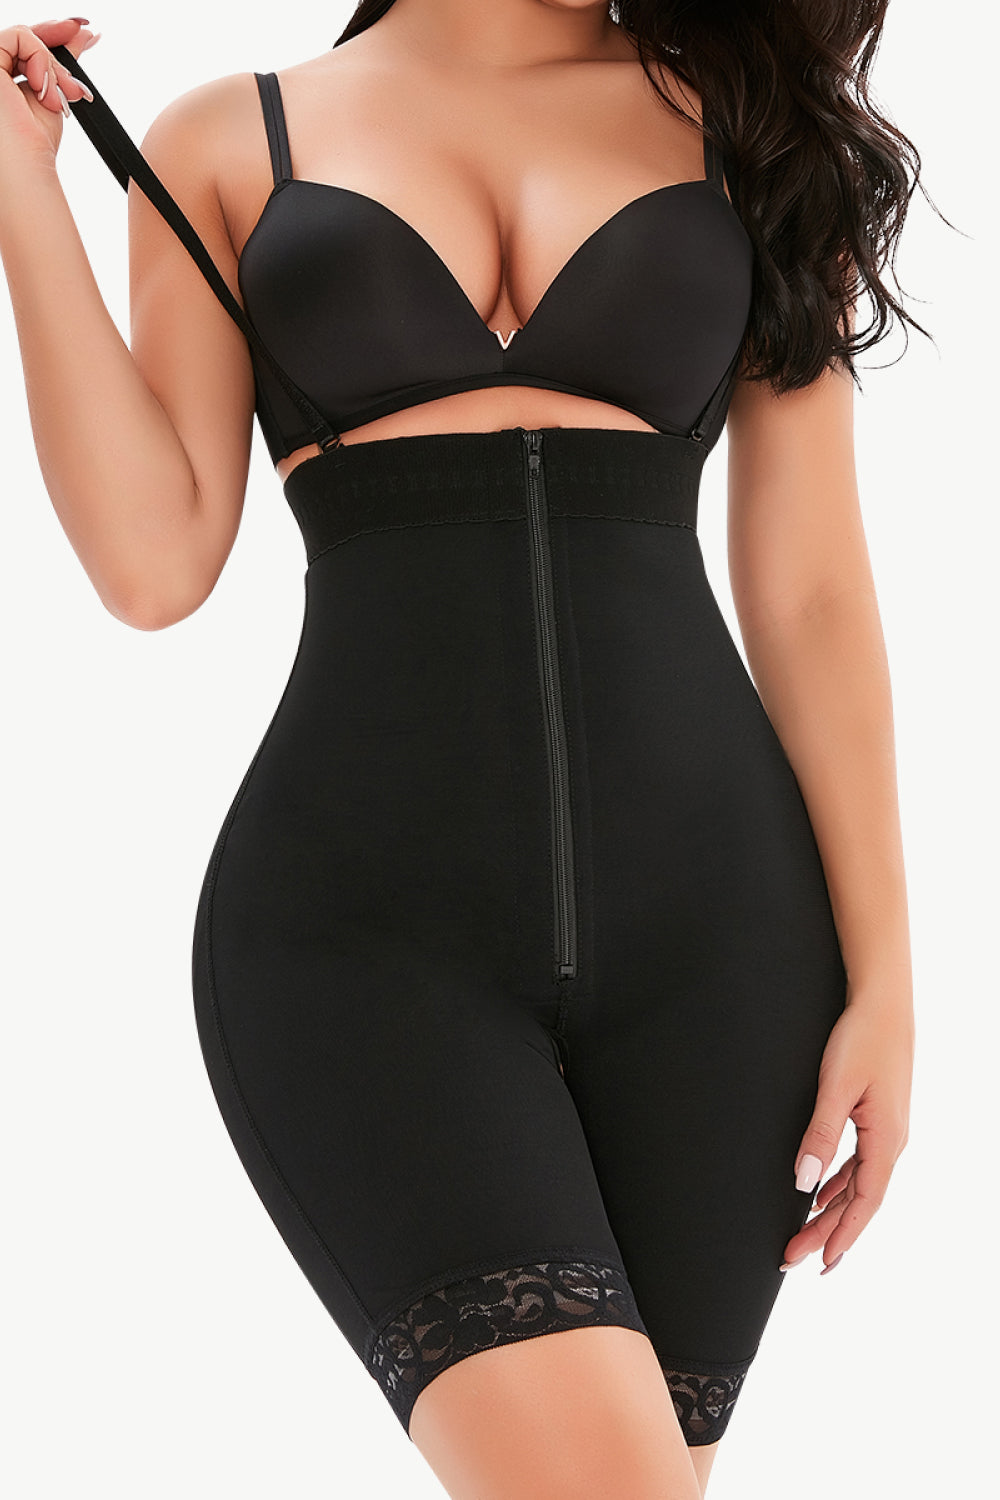 Full Size Lace Detail Zip-Up Under-Bust Shaping Bodysuit - p9nstyle